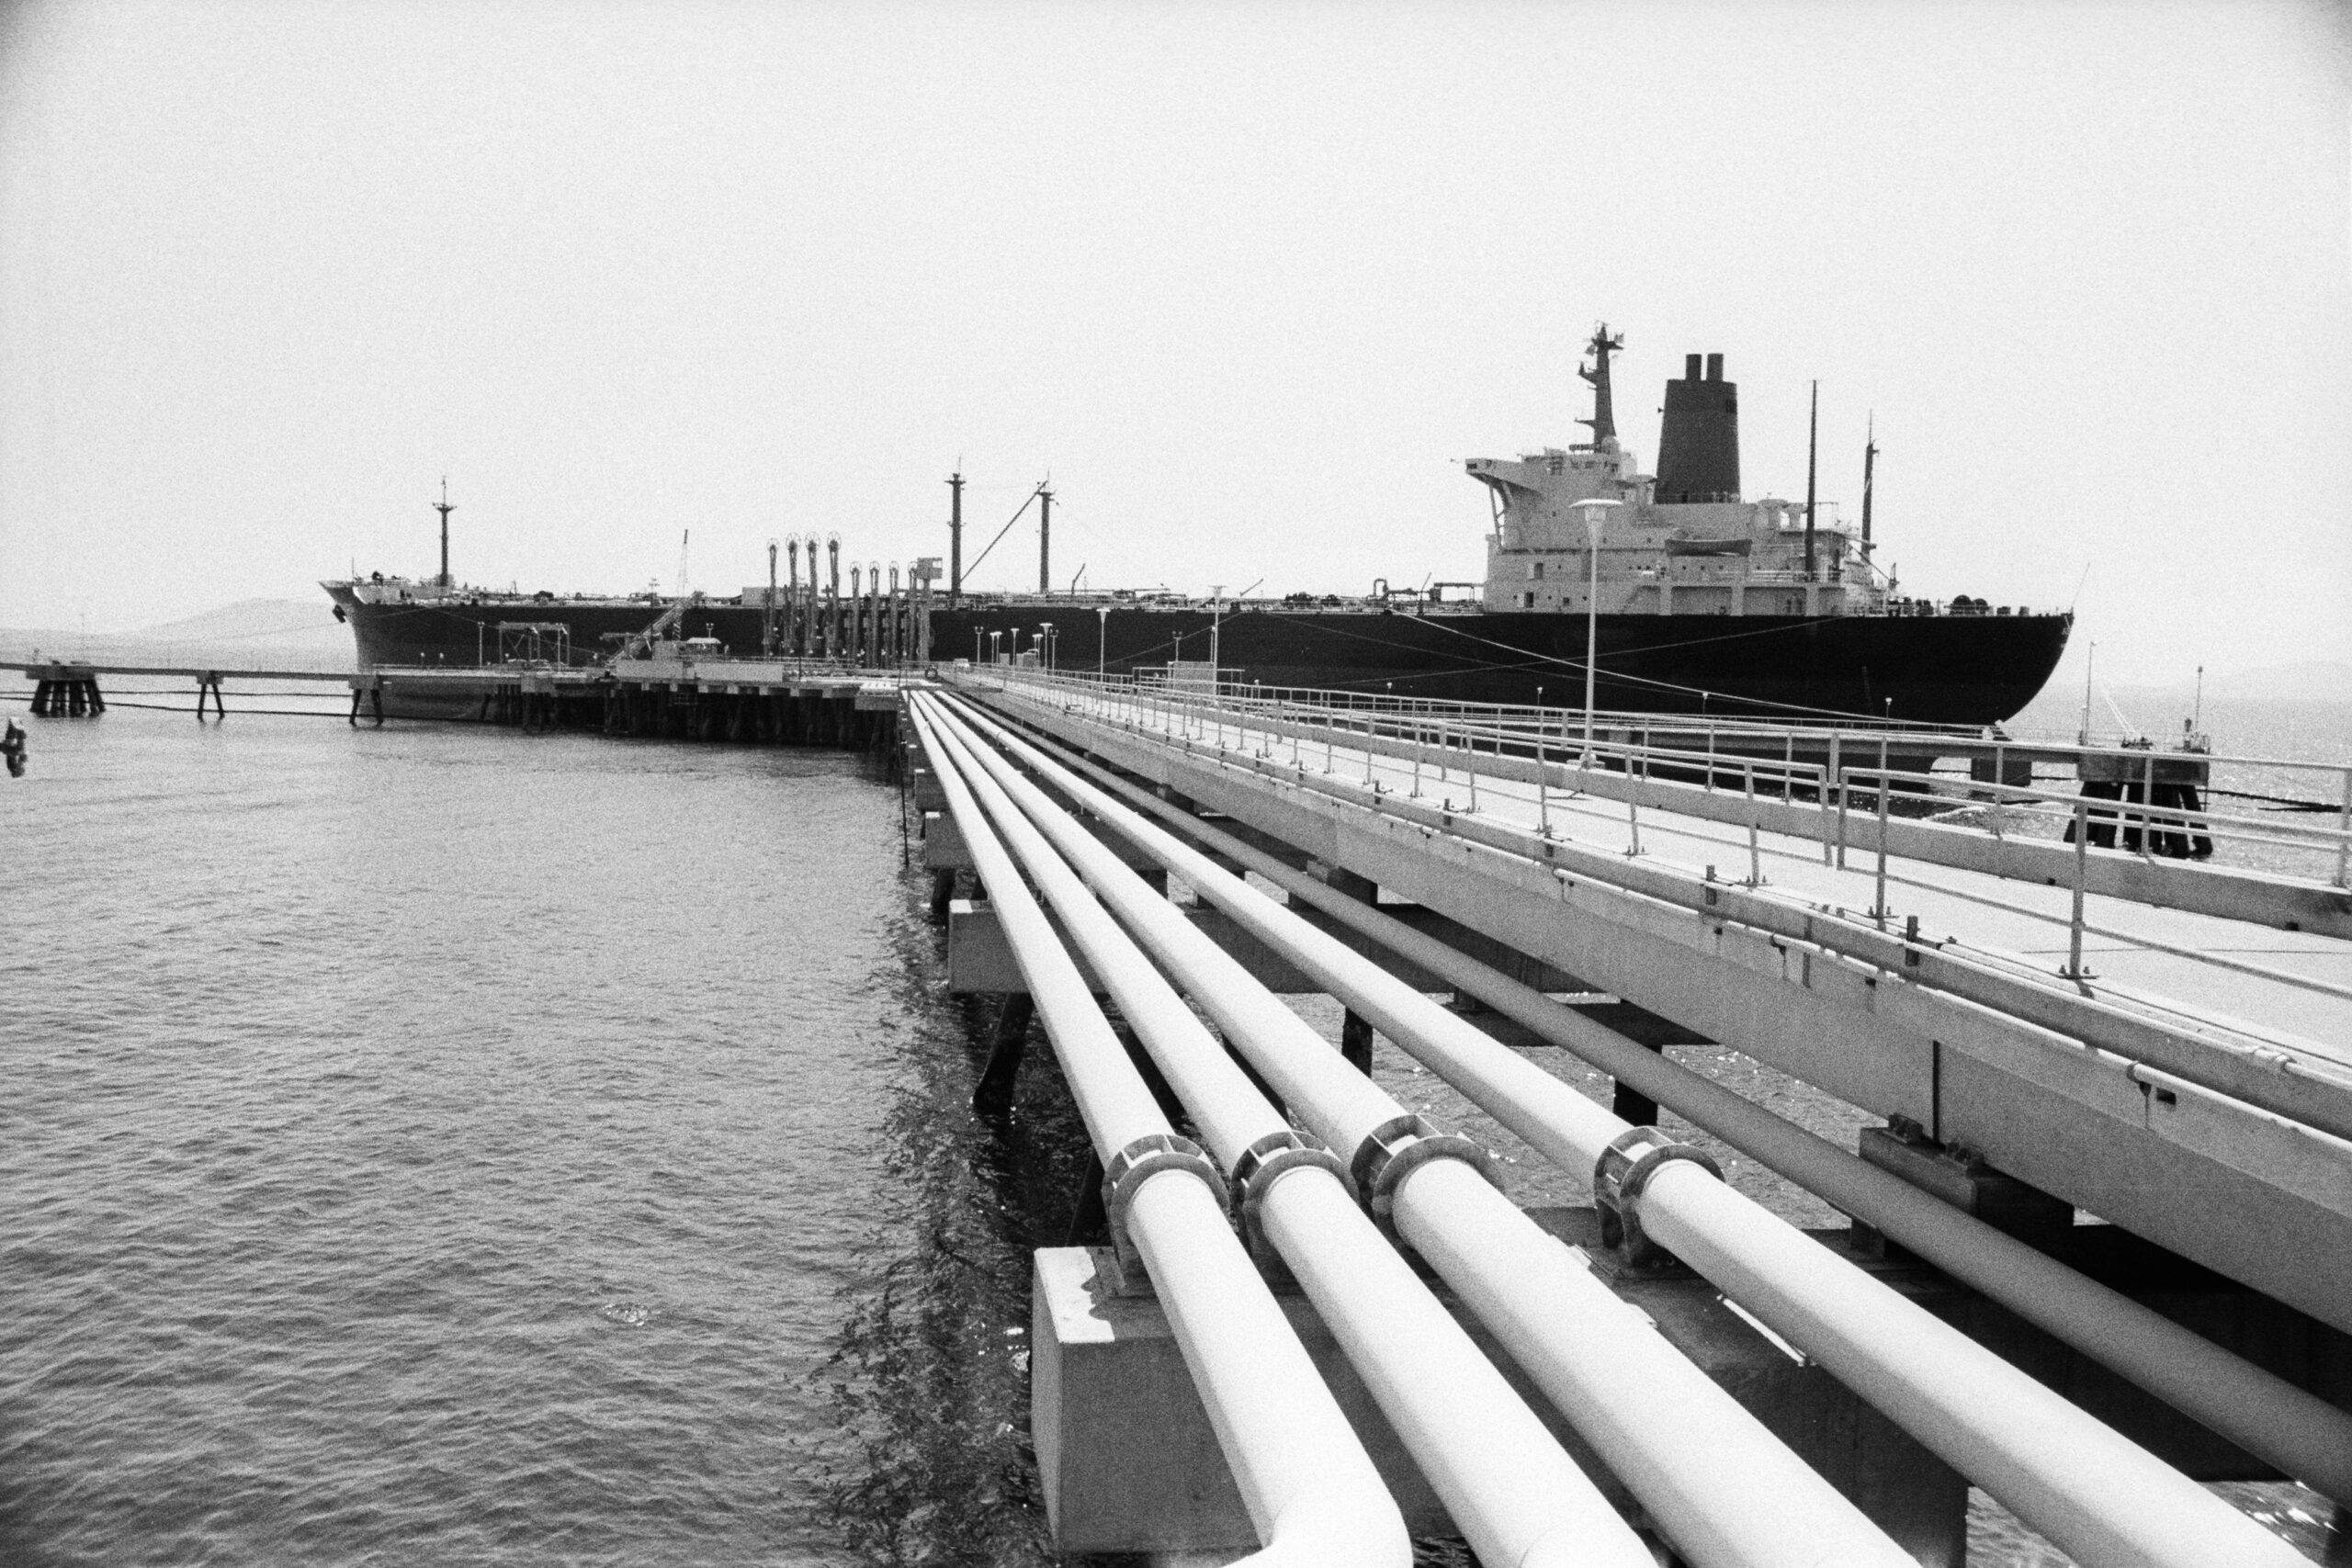 An oil tanker ship docked at BP's Cherry Point refinery